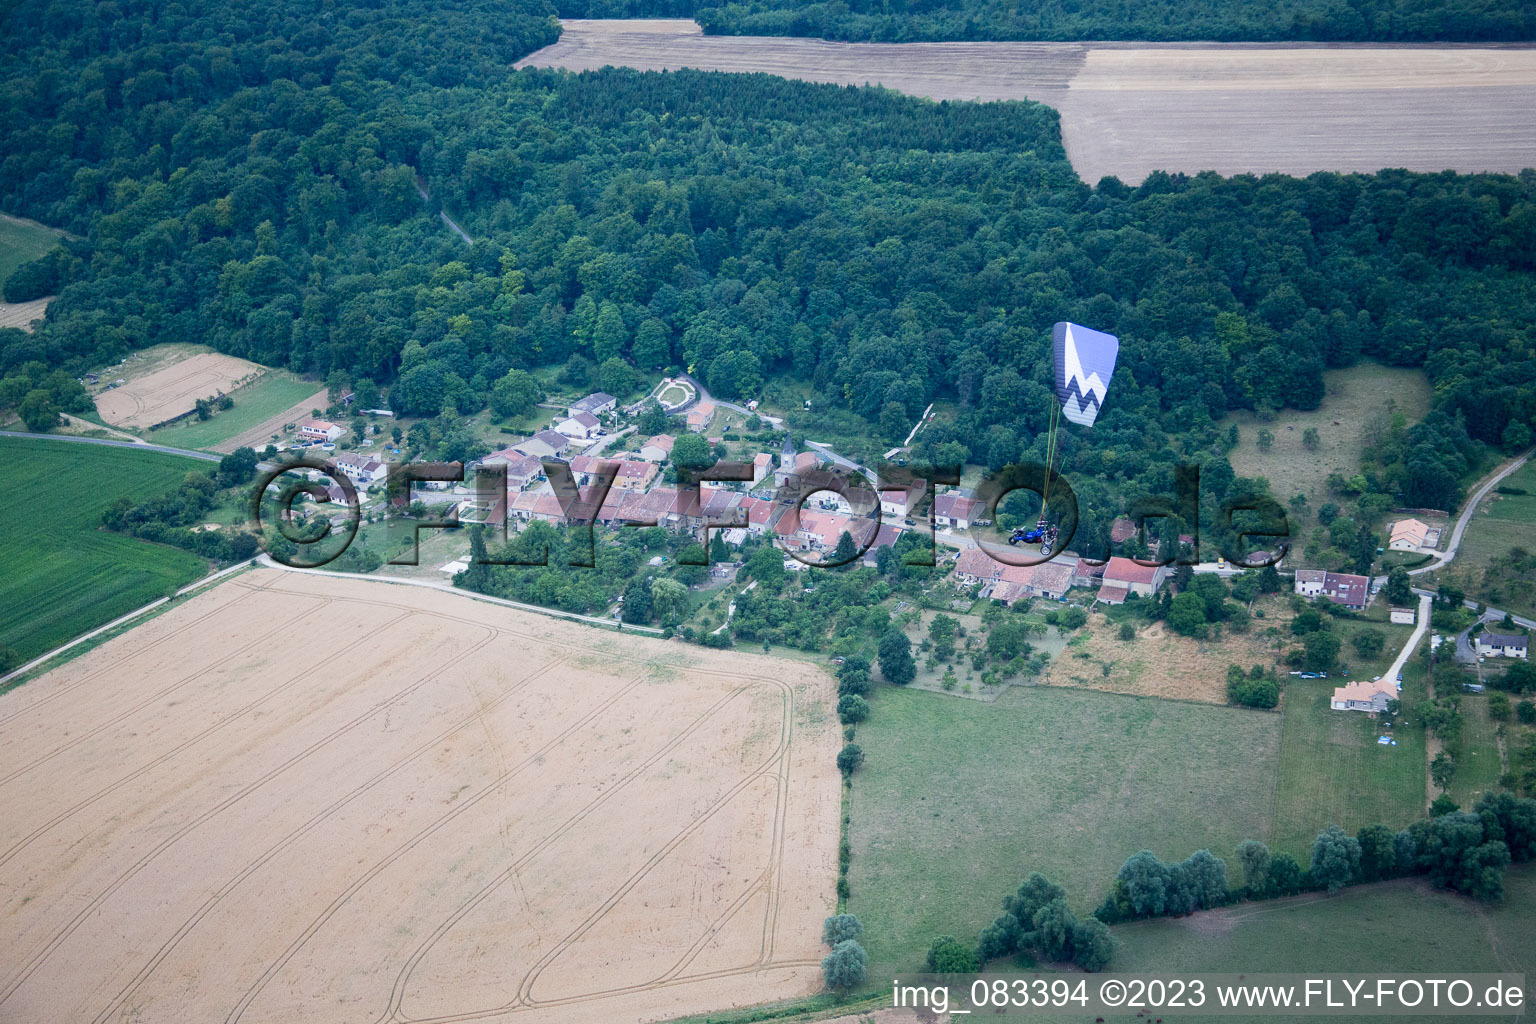 Aerial view of Girauvoisin in the state Meuse, France